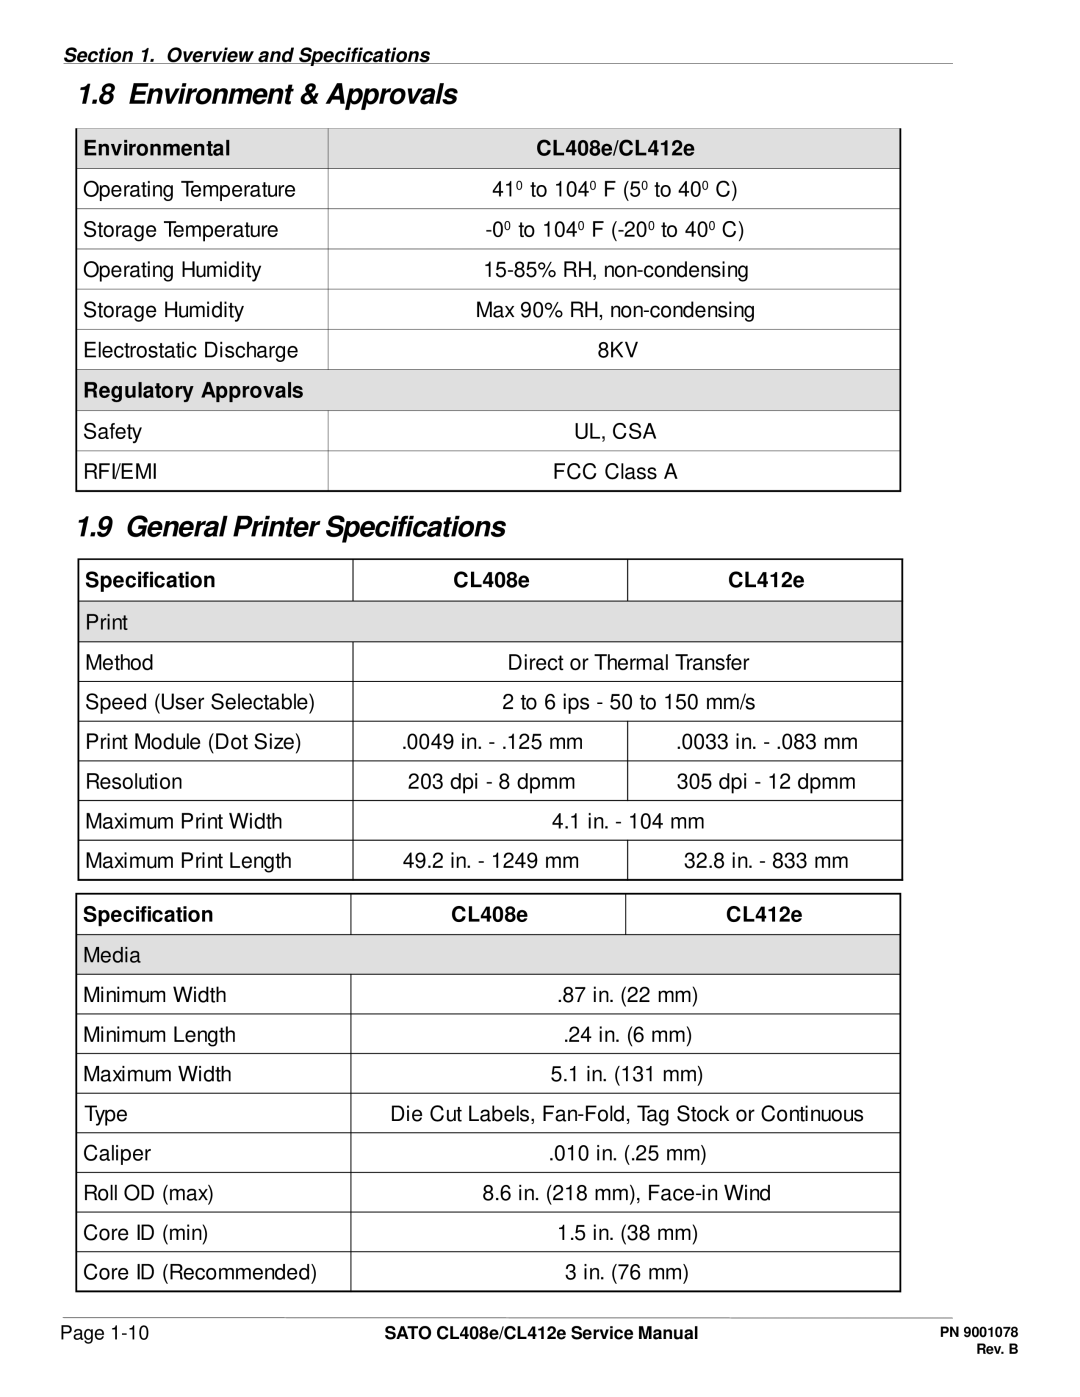 SATO CL412E service manual Environment & Approvals, General Printer Specifications 